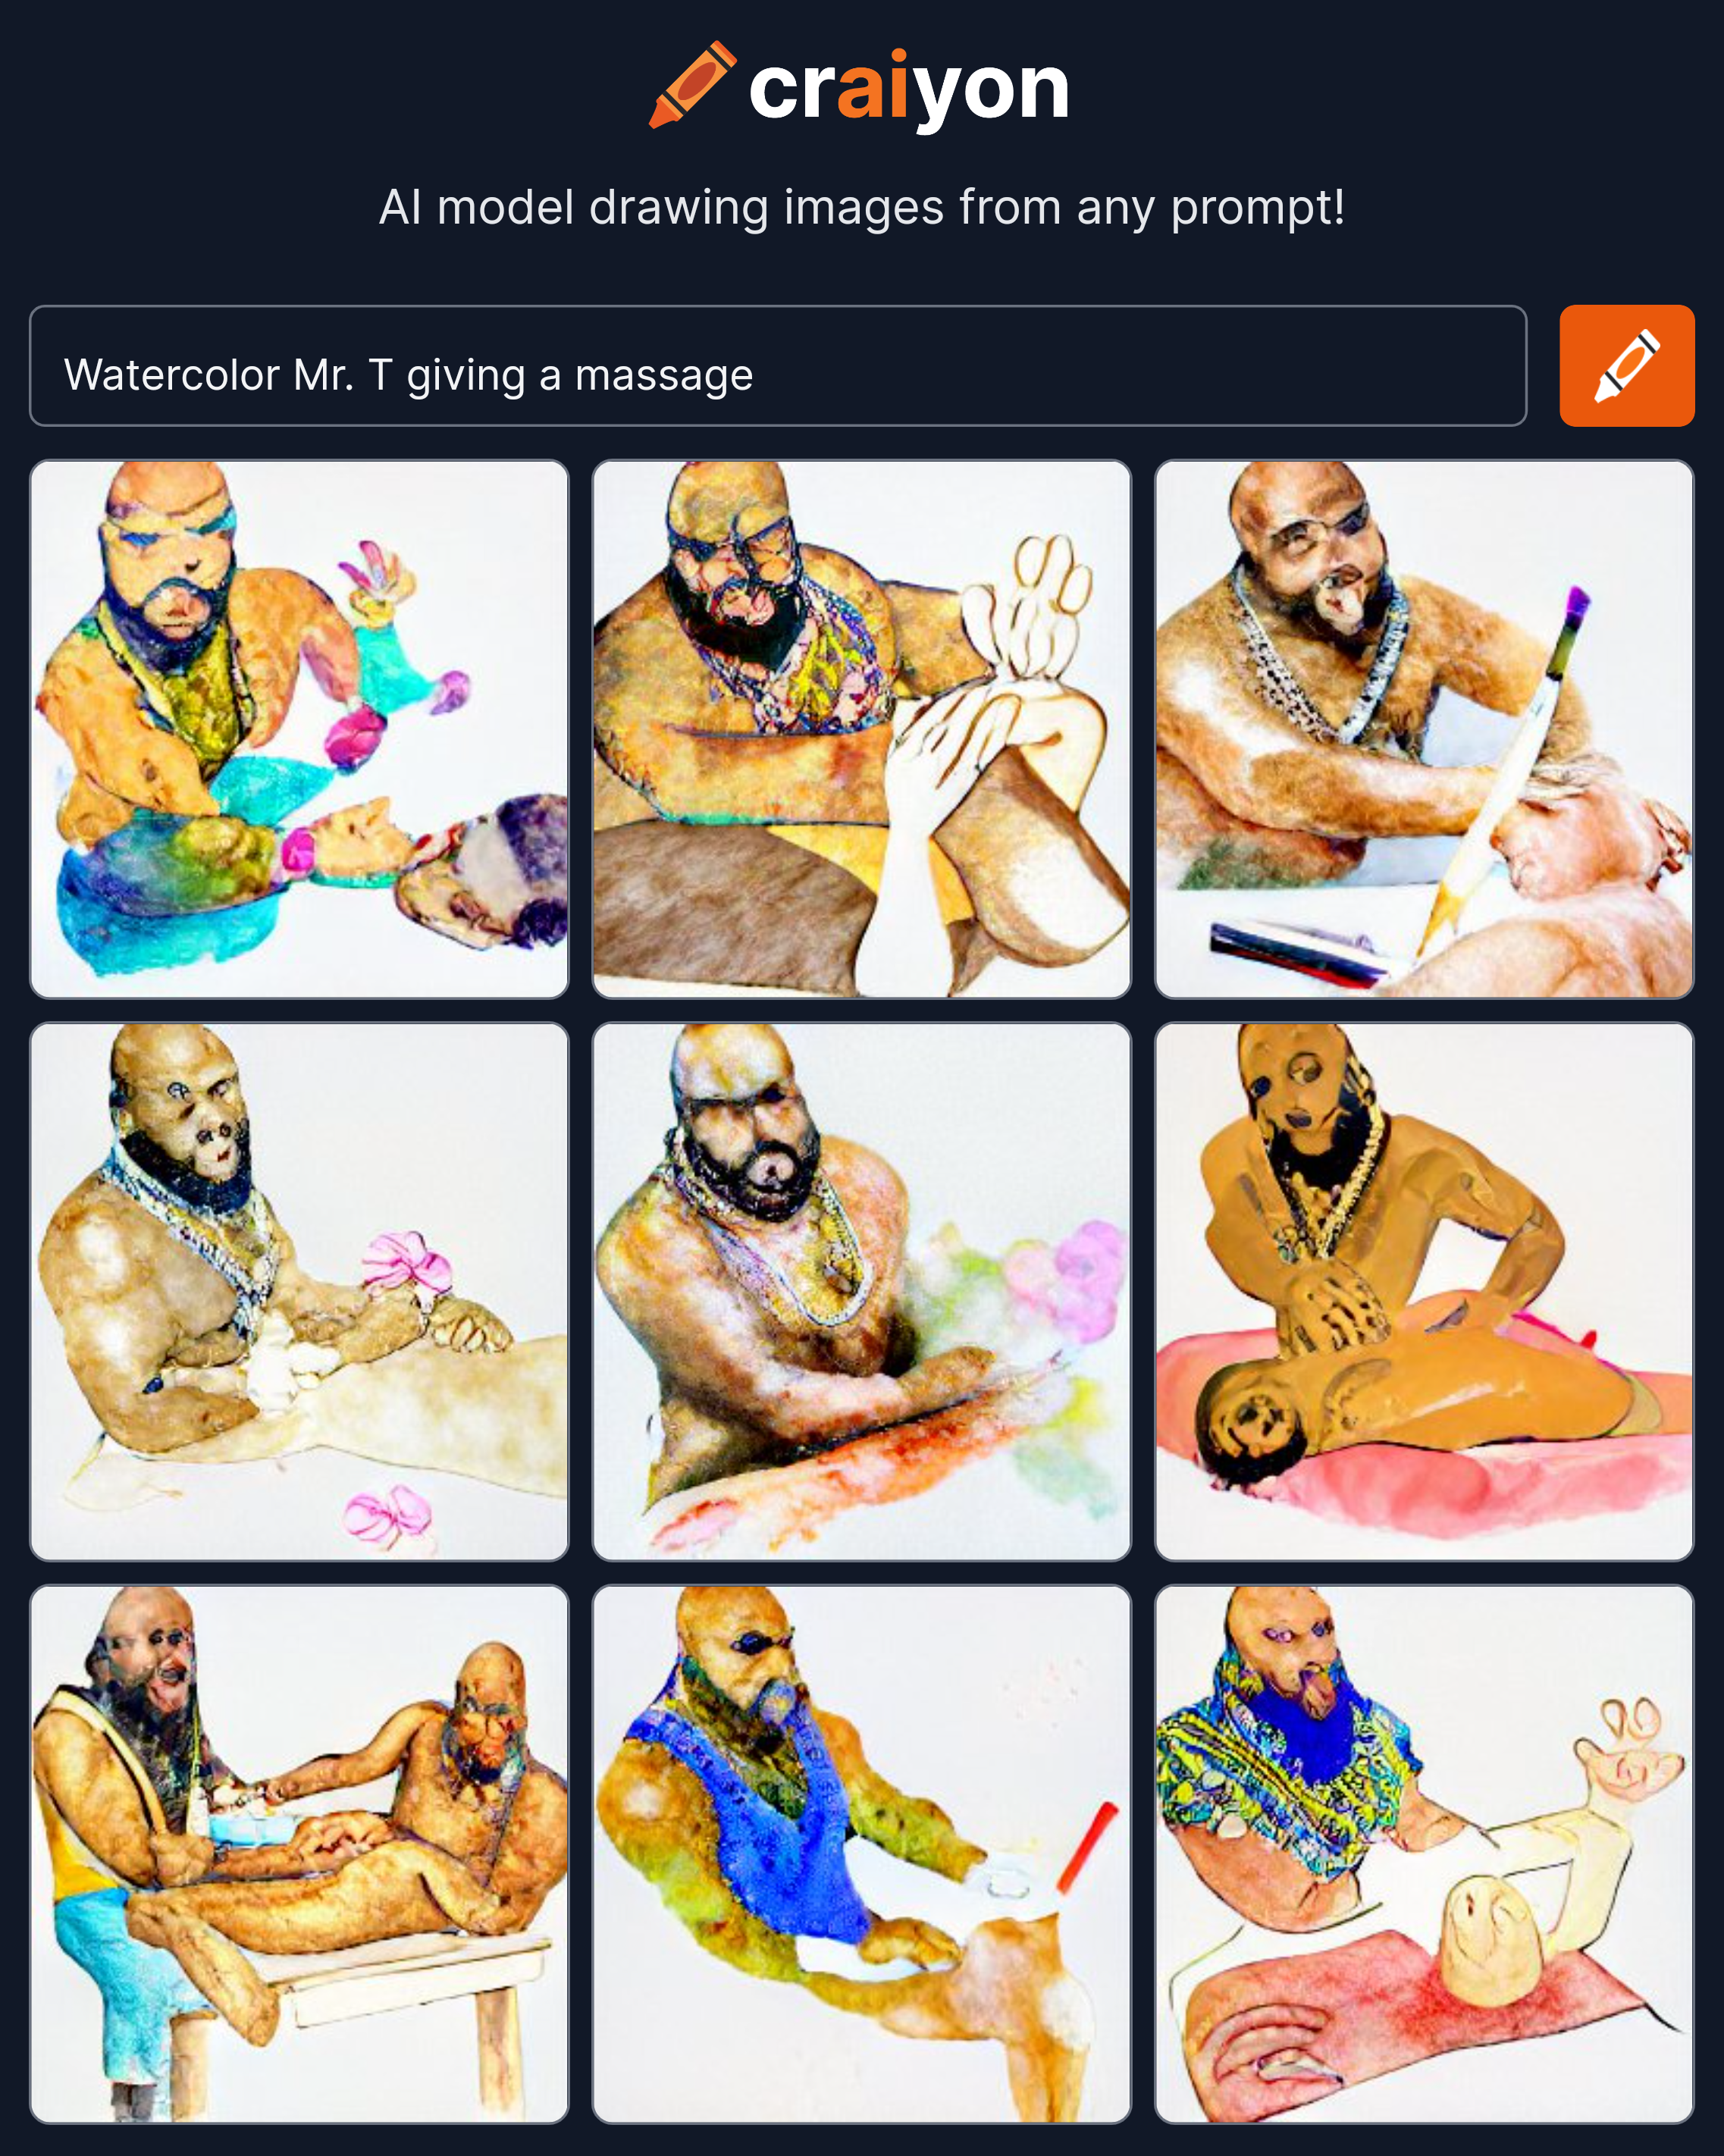 craiyon_014721_Watercolor_Mr__T_giving_a_massage.png